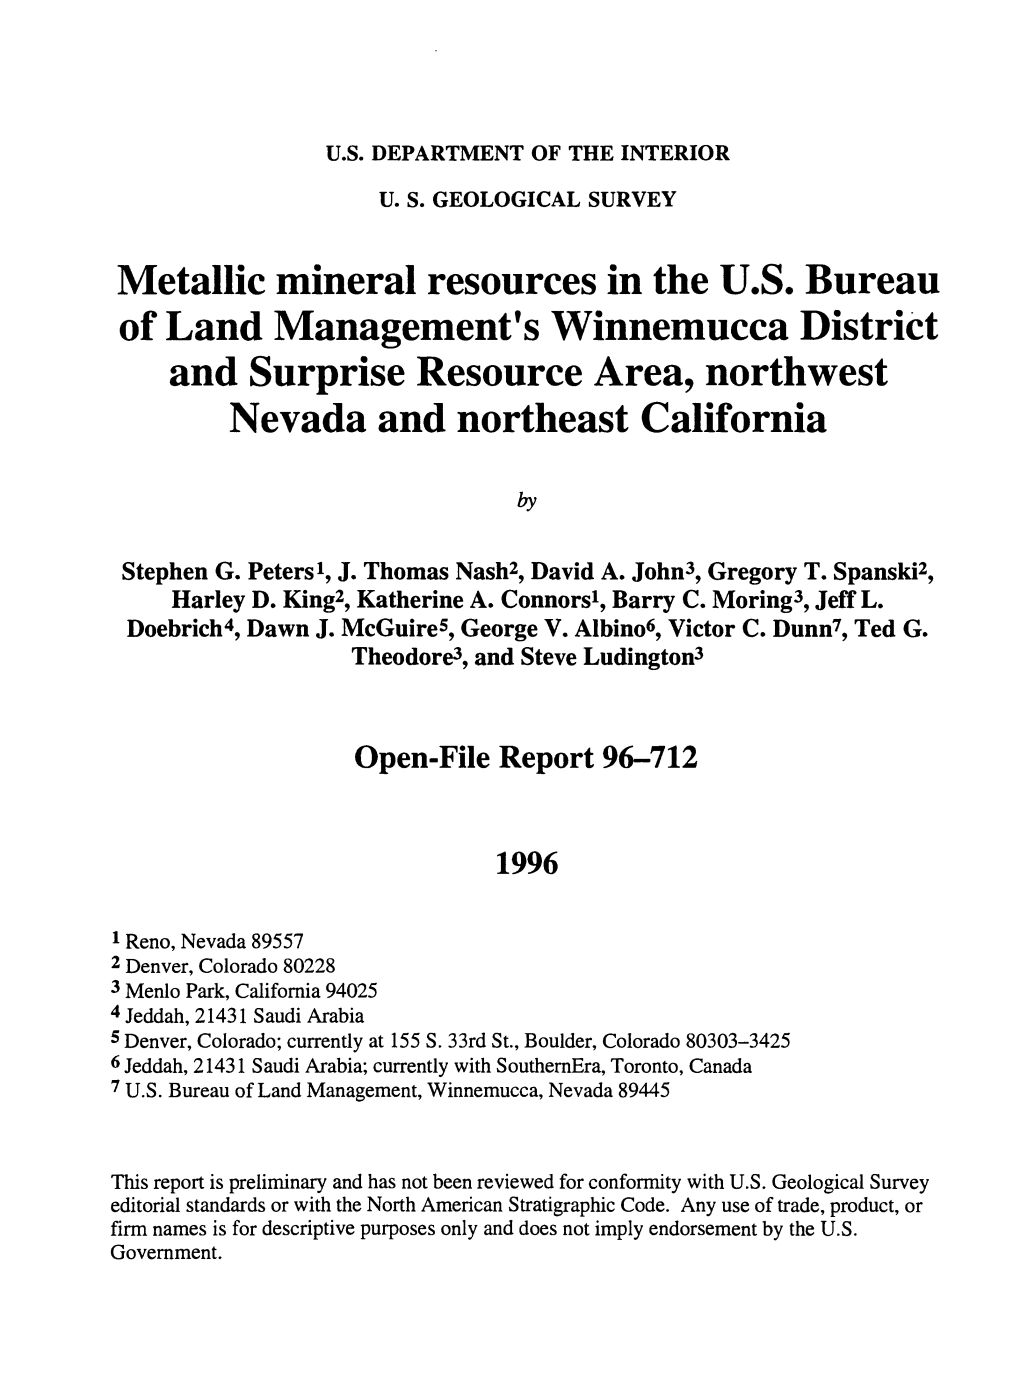 Metallic Mineral Resources in the U.S. Bureau of Land Management's Winnemucca District and Surprise Resource Area, Northwest Nevada and Northeast California